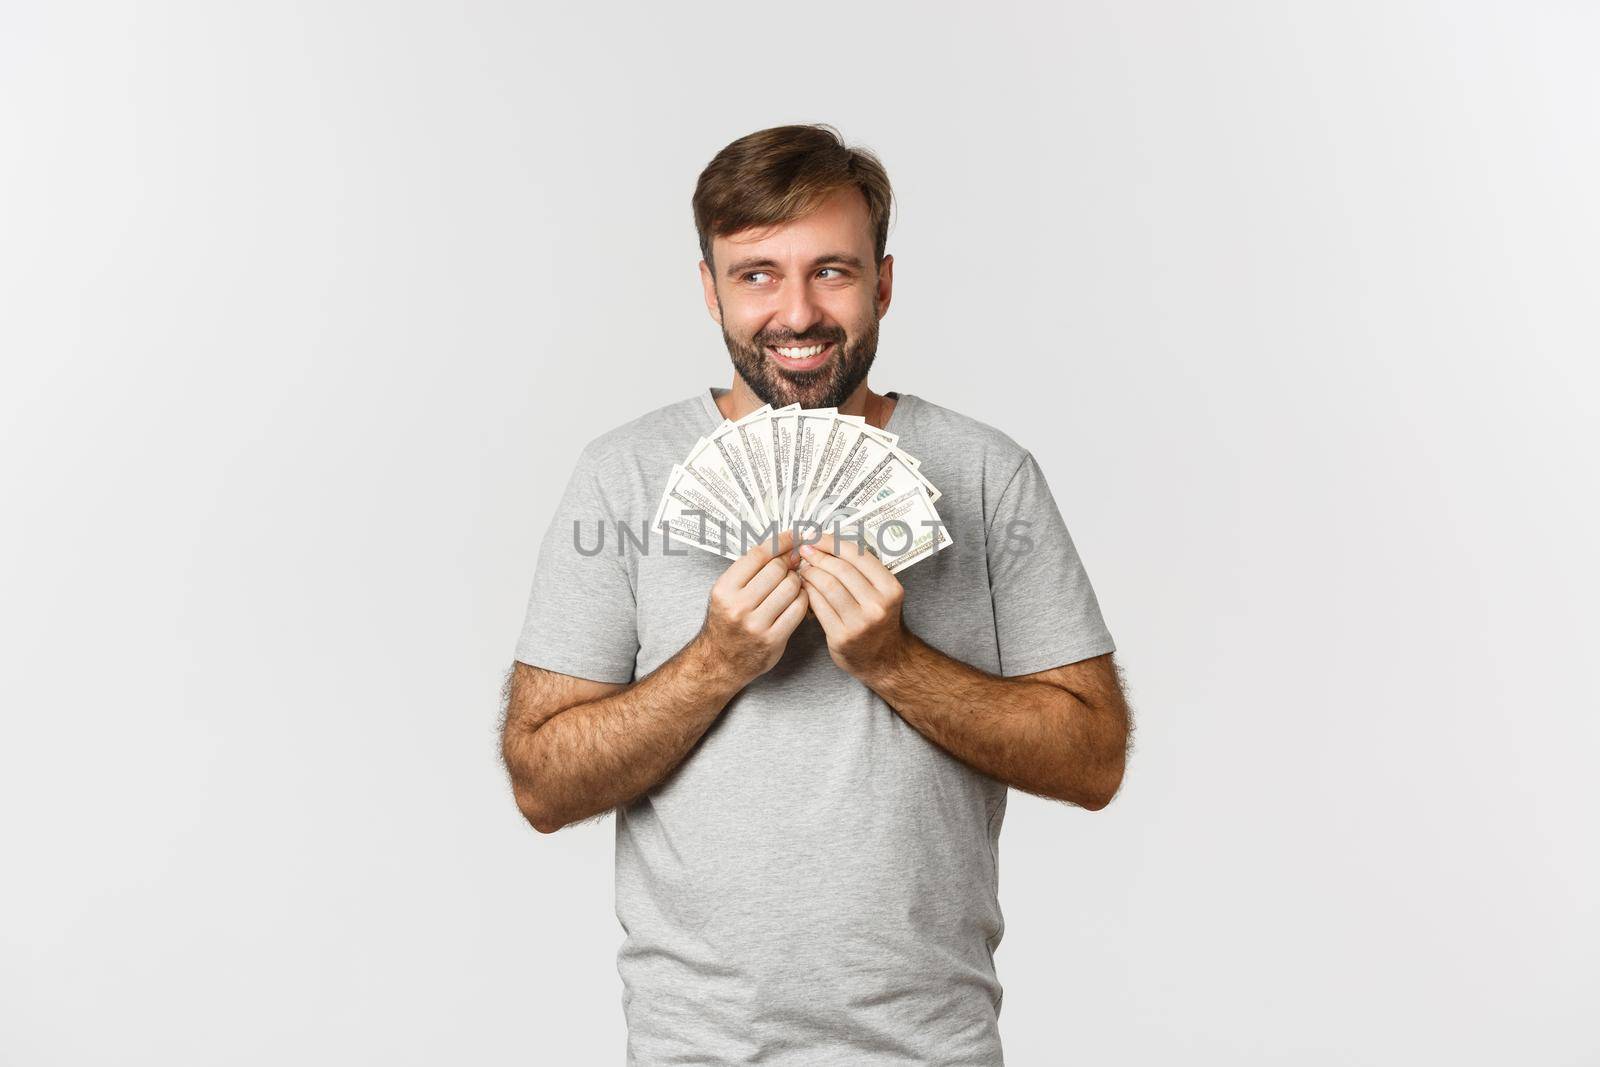 Greedy smiling greedy man with beard, thinking about shopping, holding money and looking at upper left corner, standing over white background.